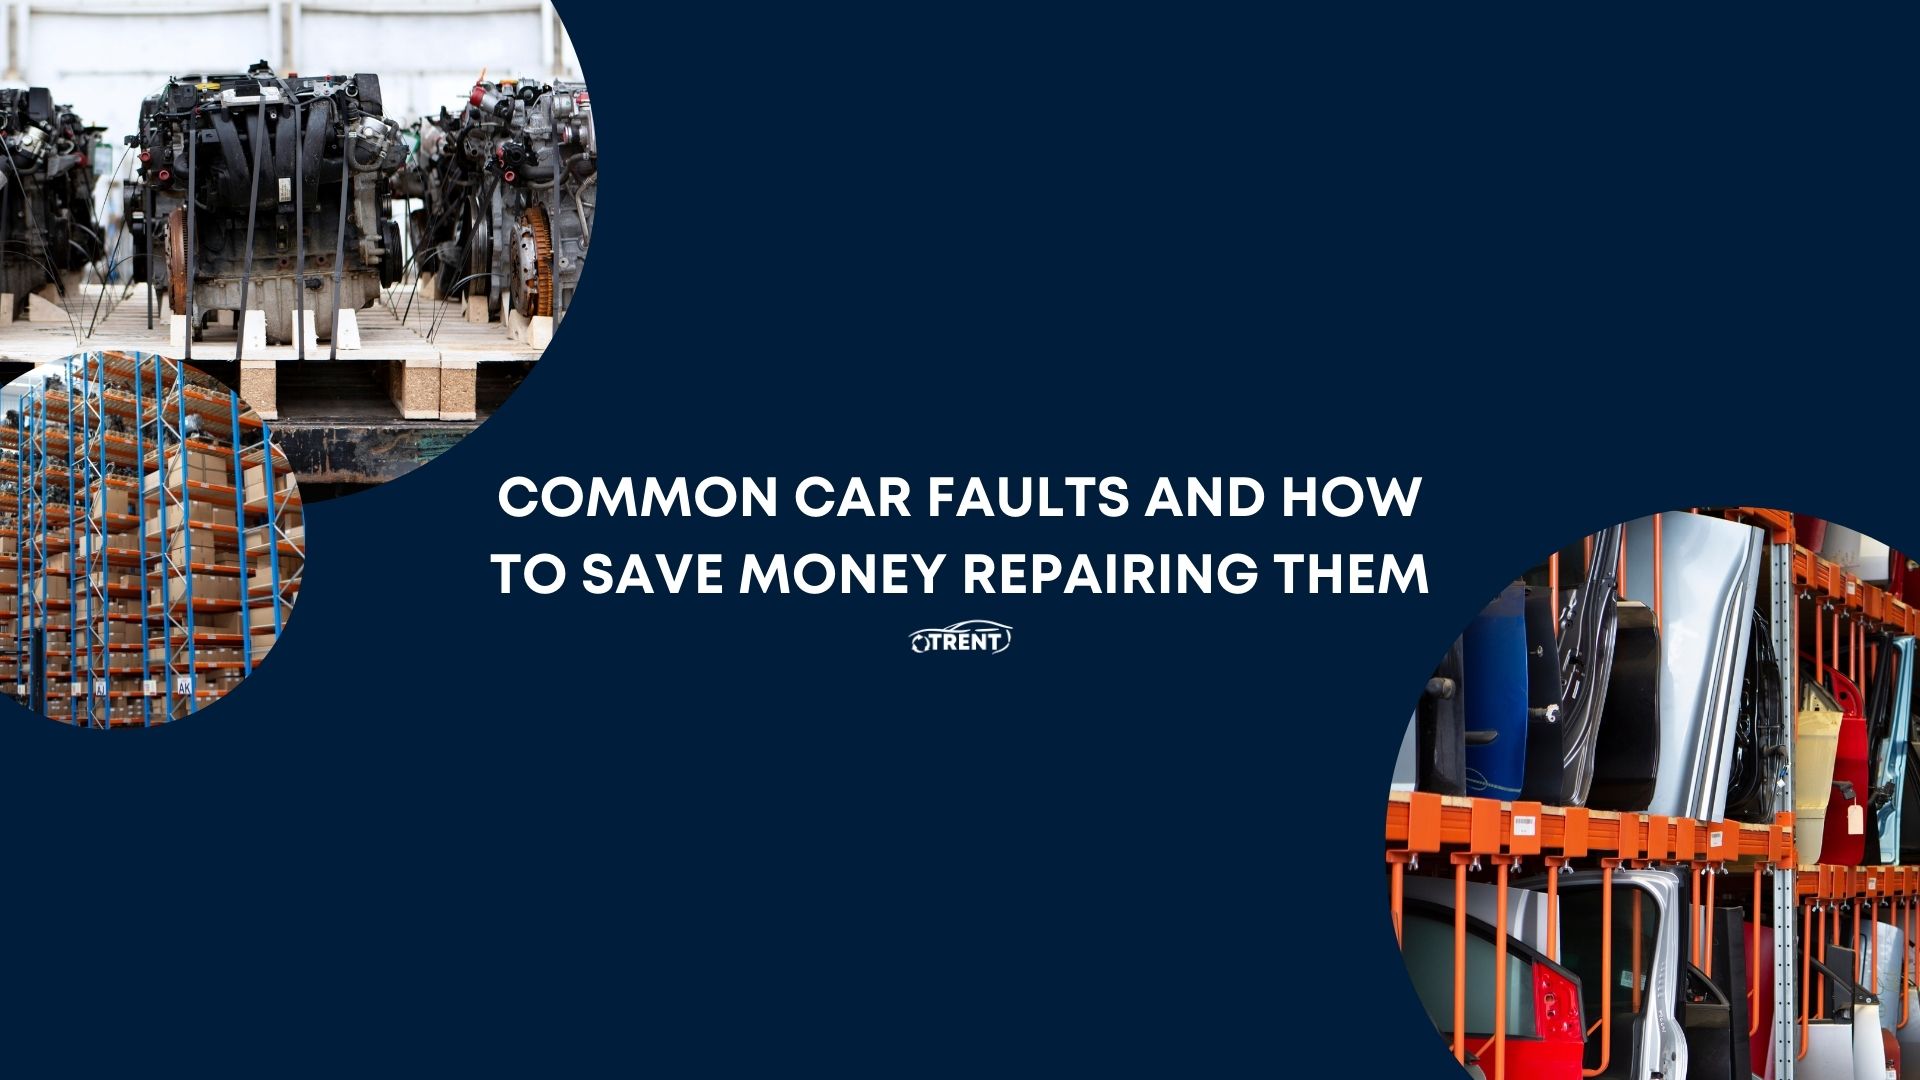 How to save money on common vehicle faults.